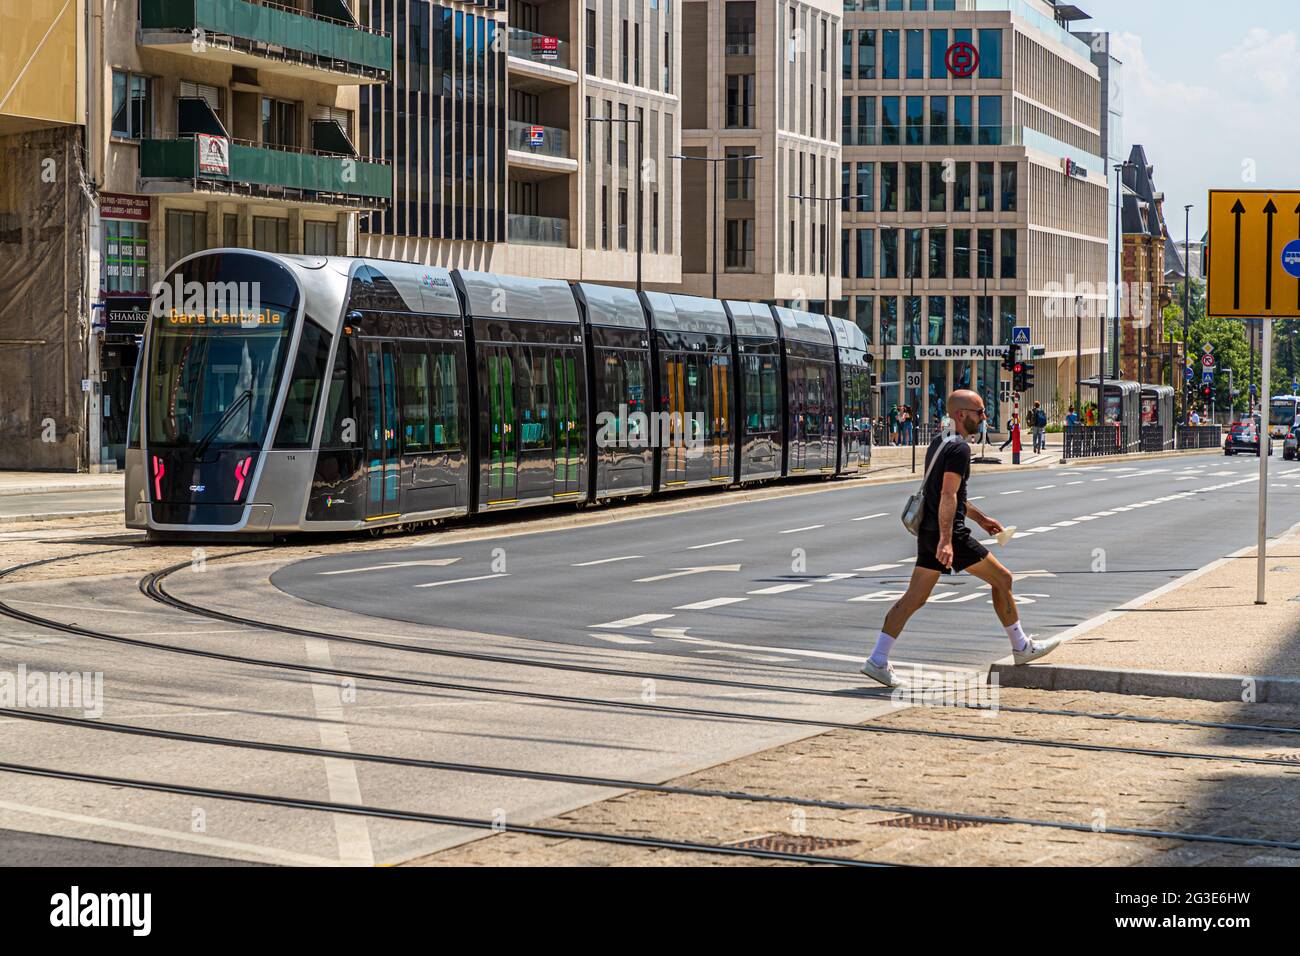 A pedestrian crosses the street in front of a streetcar in Luxembourg city Stock Photo